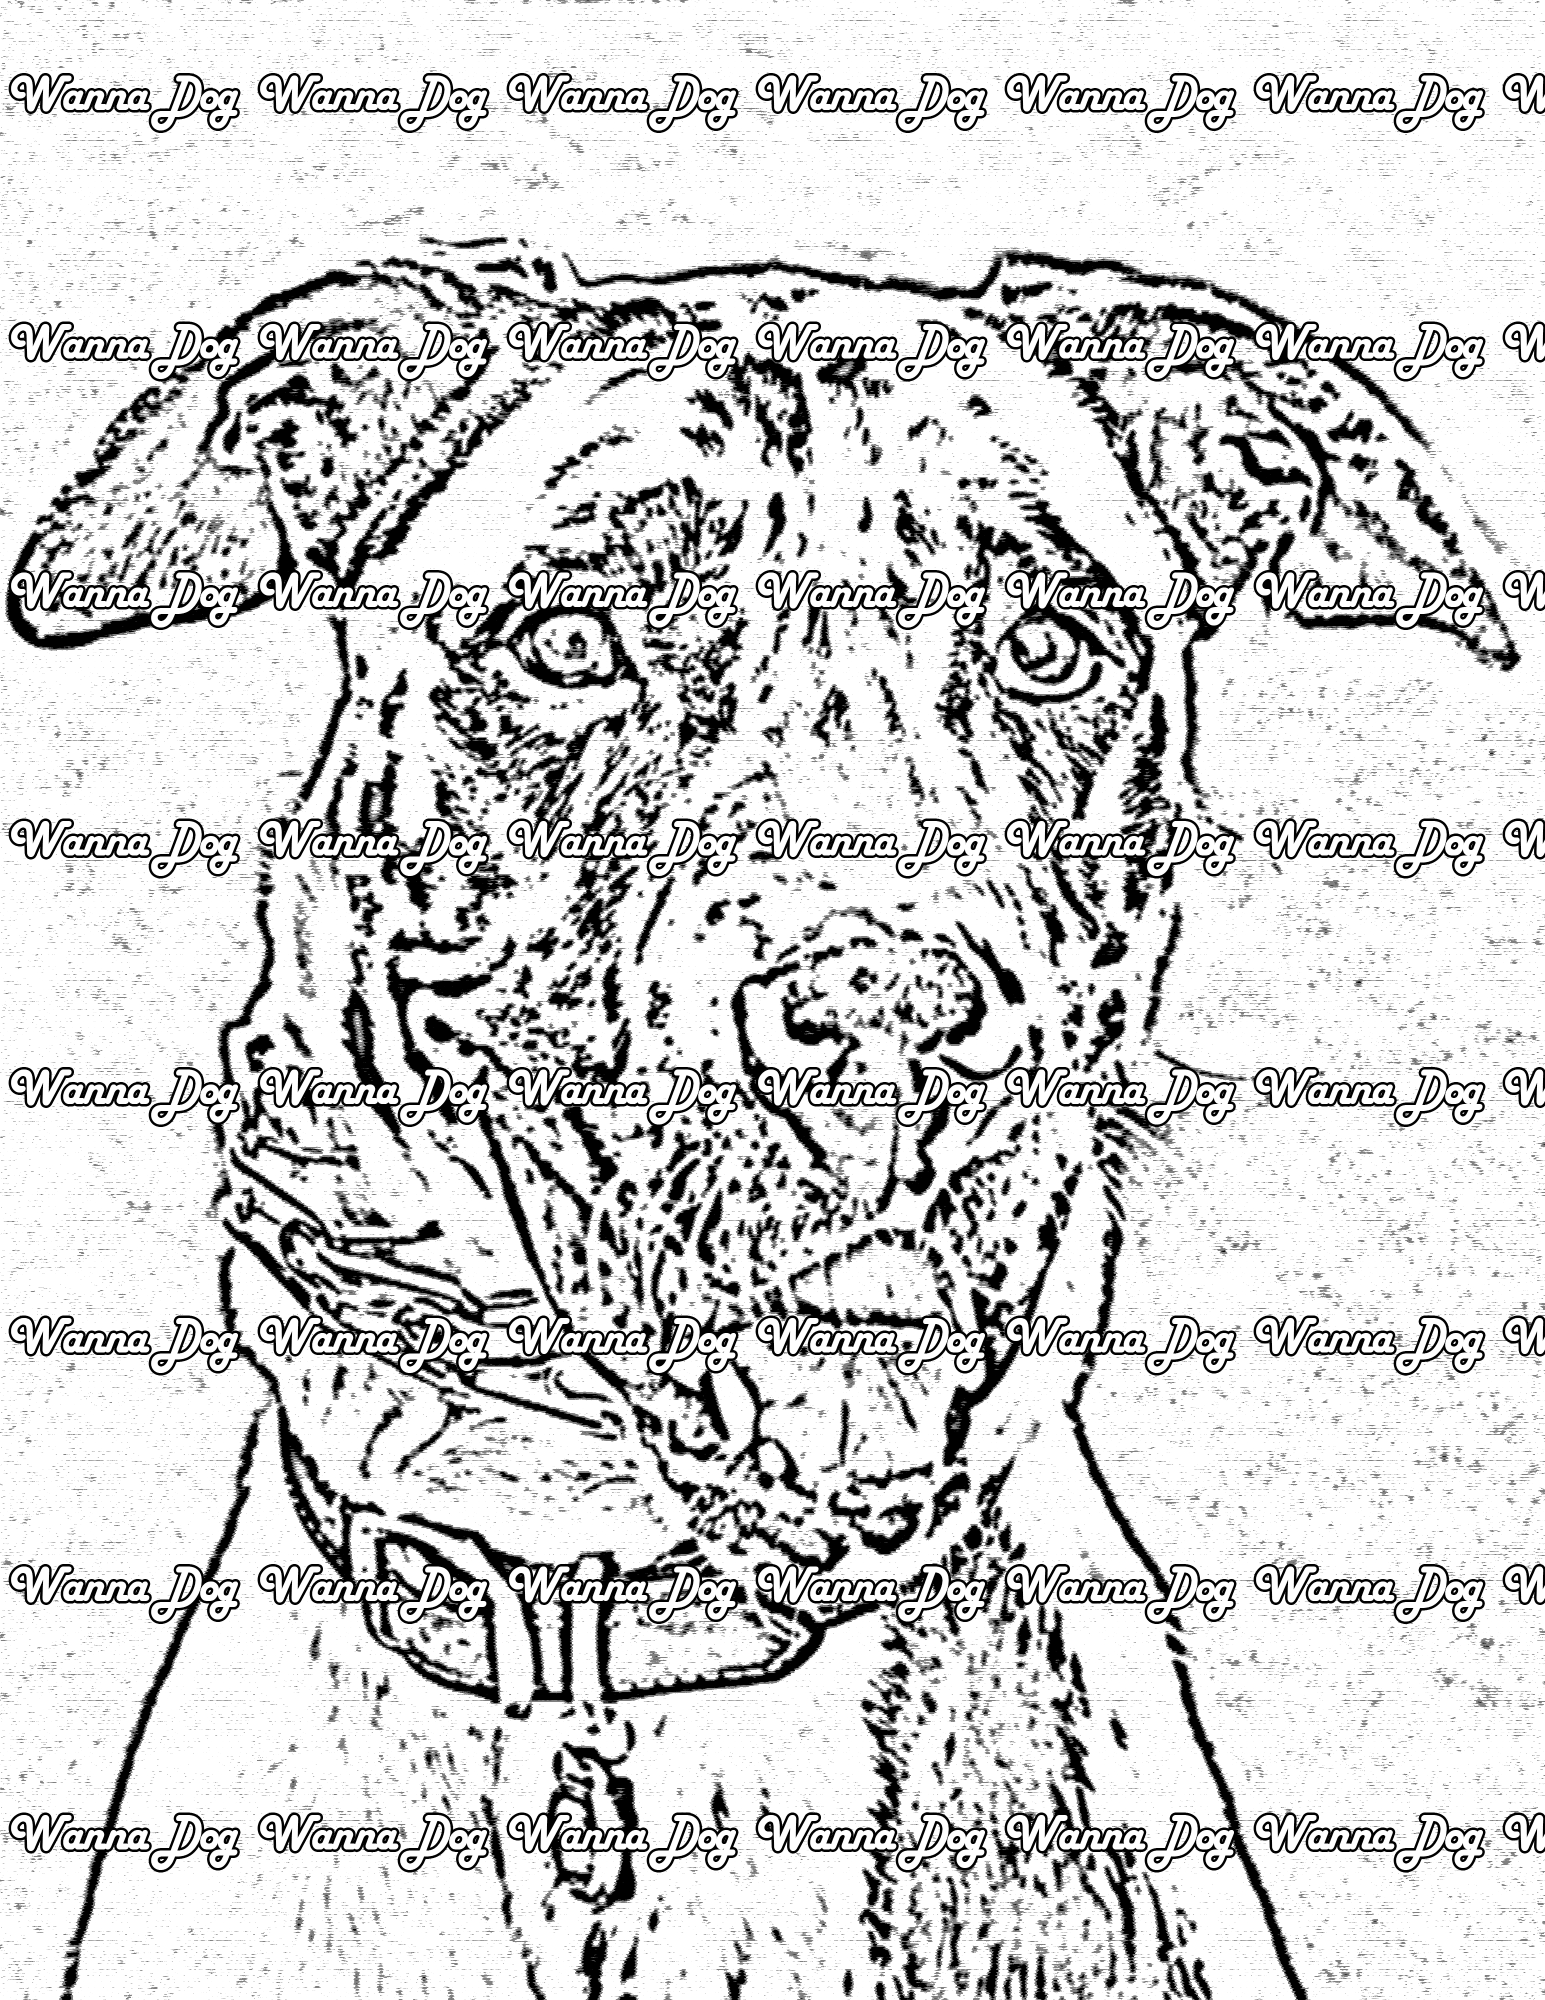 Great Dane Coloring Page of a Great Dane close up with their tongue out